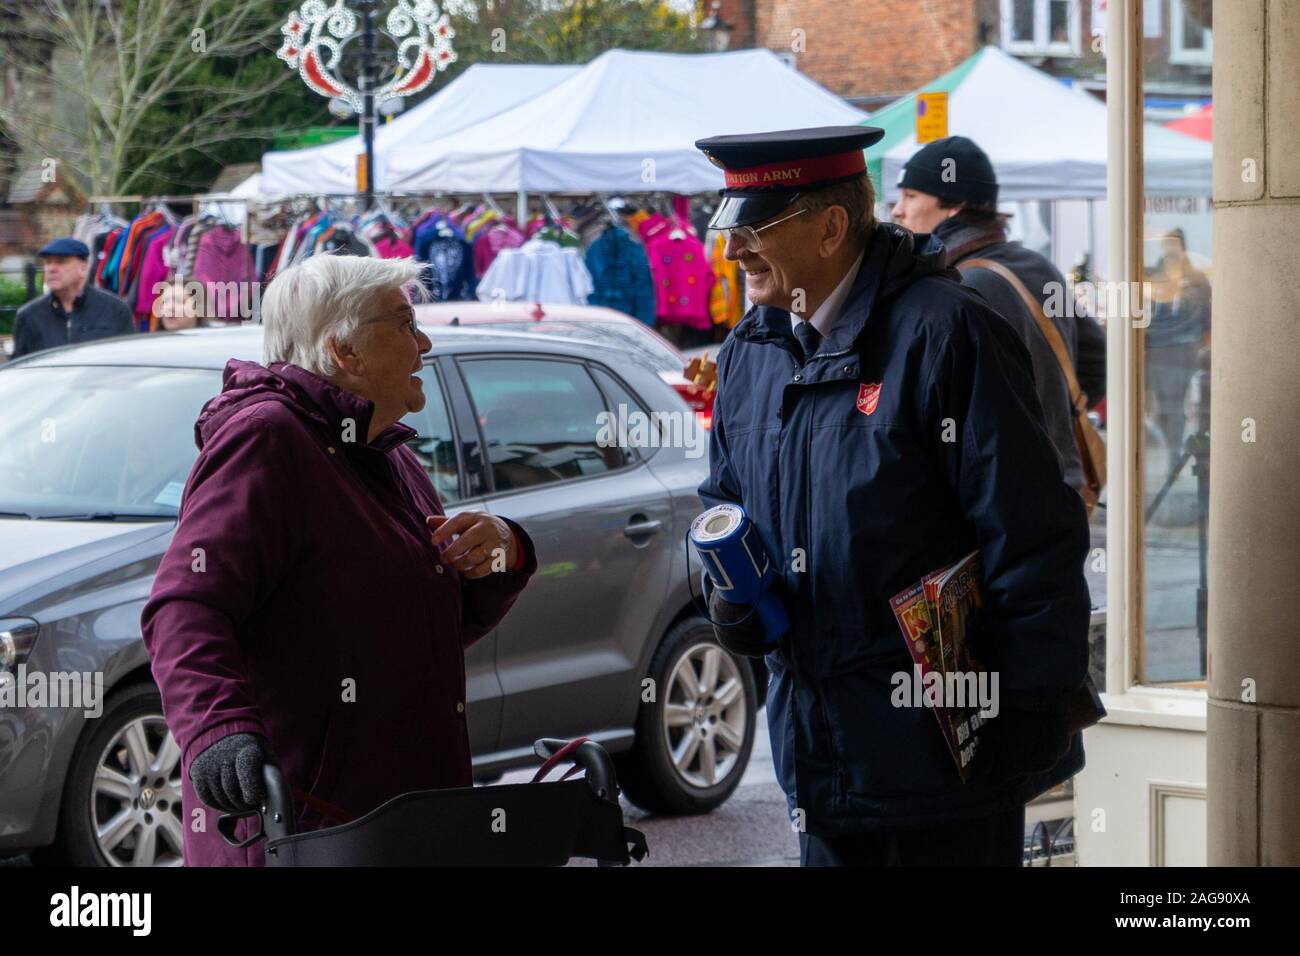 A member of the salvation army collecting money for charity at Christmas speaking to an elderly lady in the street Stock Photo